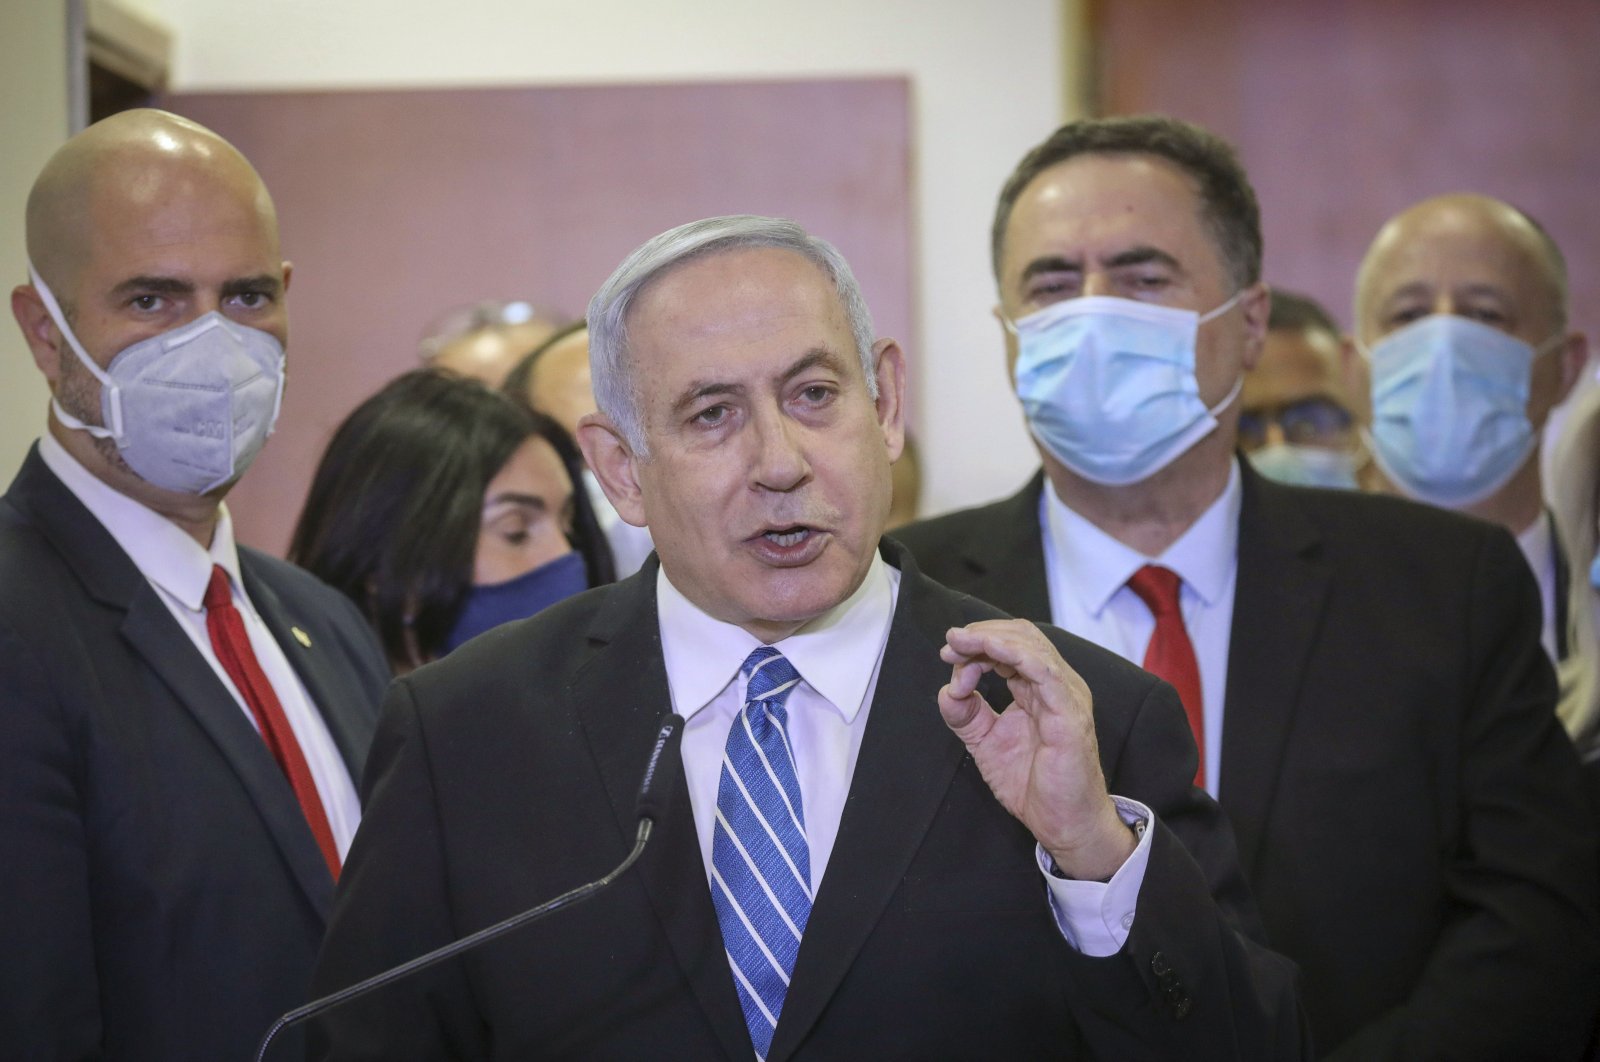 Israeli Prime Minister Benjamin Netanyahu accompanied by members of his Likud Party in masks delivers a statement before entering the district courthouse, Jerusalem, May 24, 2020. (AP Photo)